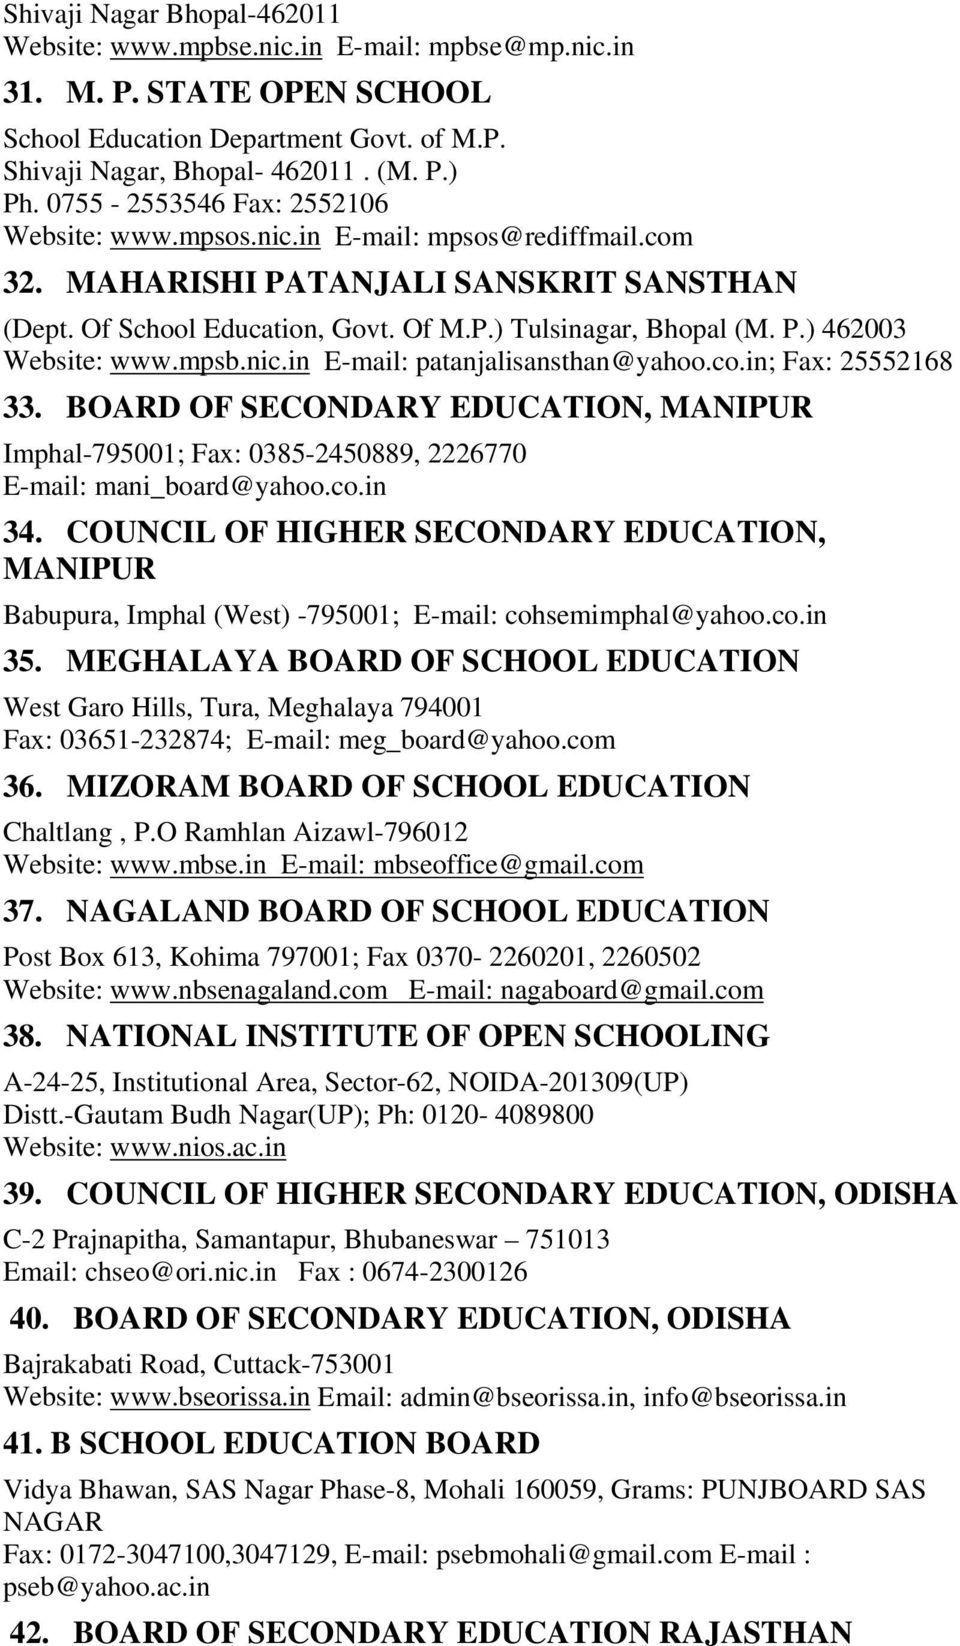 mpsb.nic.in E-mail: patanjalisansthan@yahoo.co.in; Fax: 25552168 33. BOARD OF SECONDARY EDUCATION, MANIPUR Imphal-795001; Fax: 0385-2450889, 2226770 E-mail: mani_board@yahoo.co.in 34.